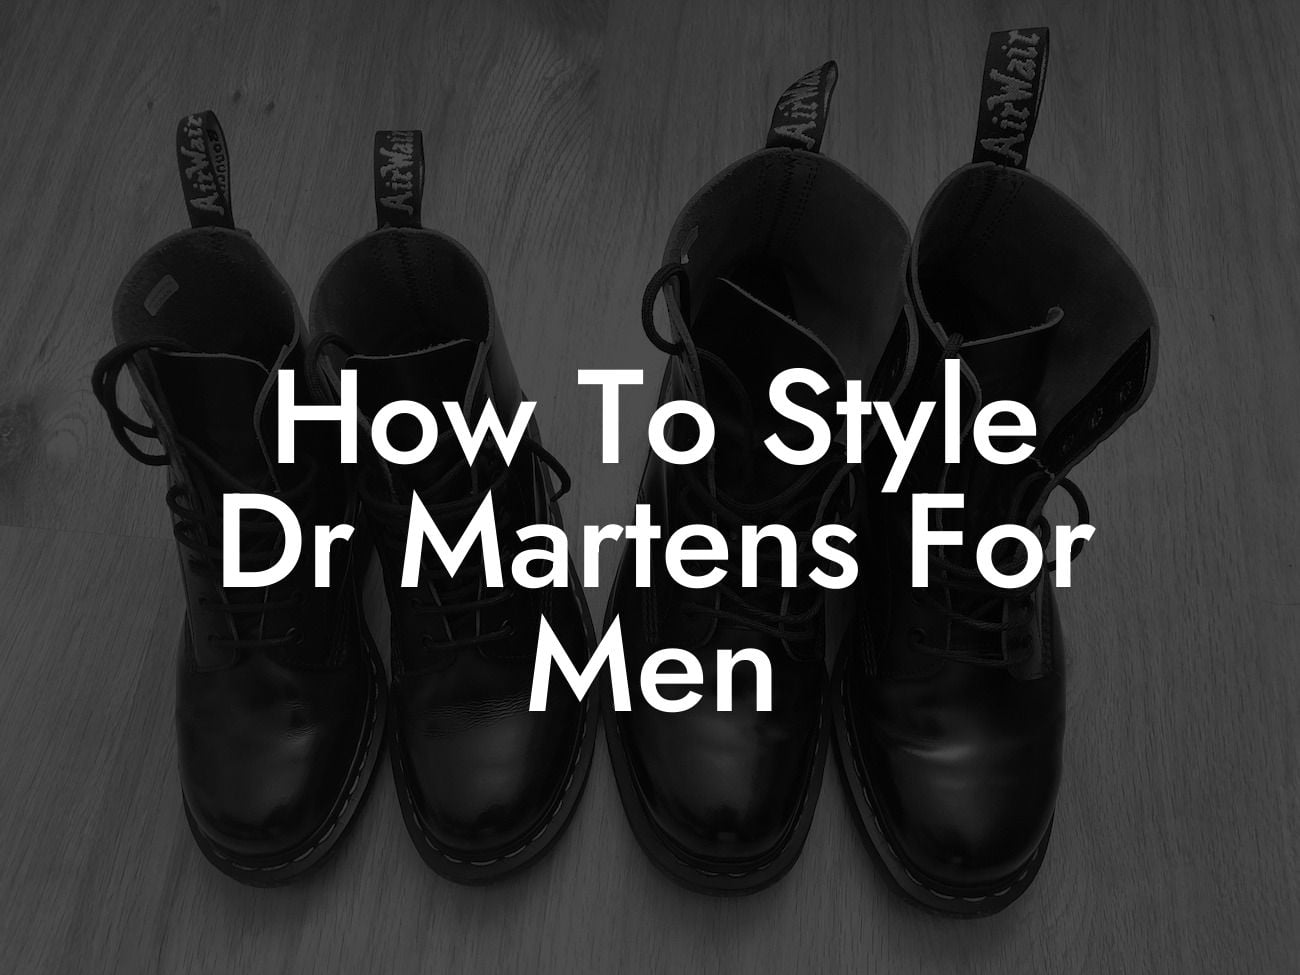 How To Style Dr Martens For Men